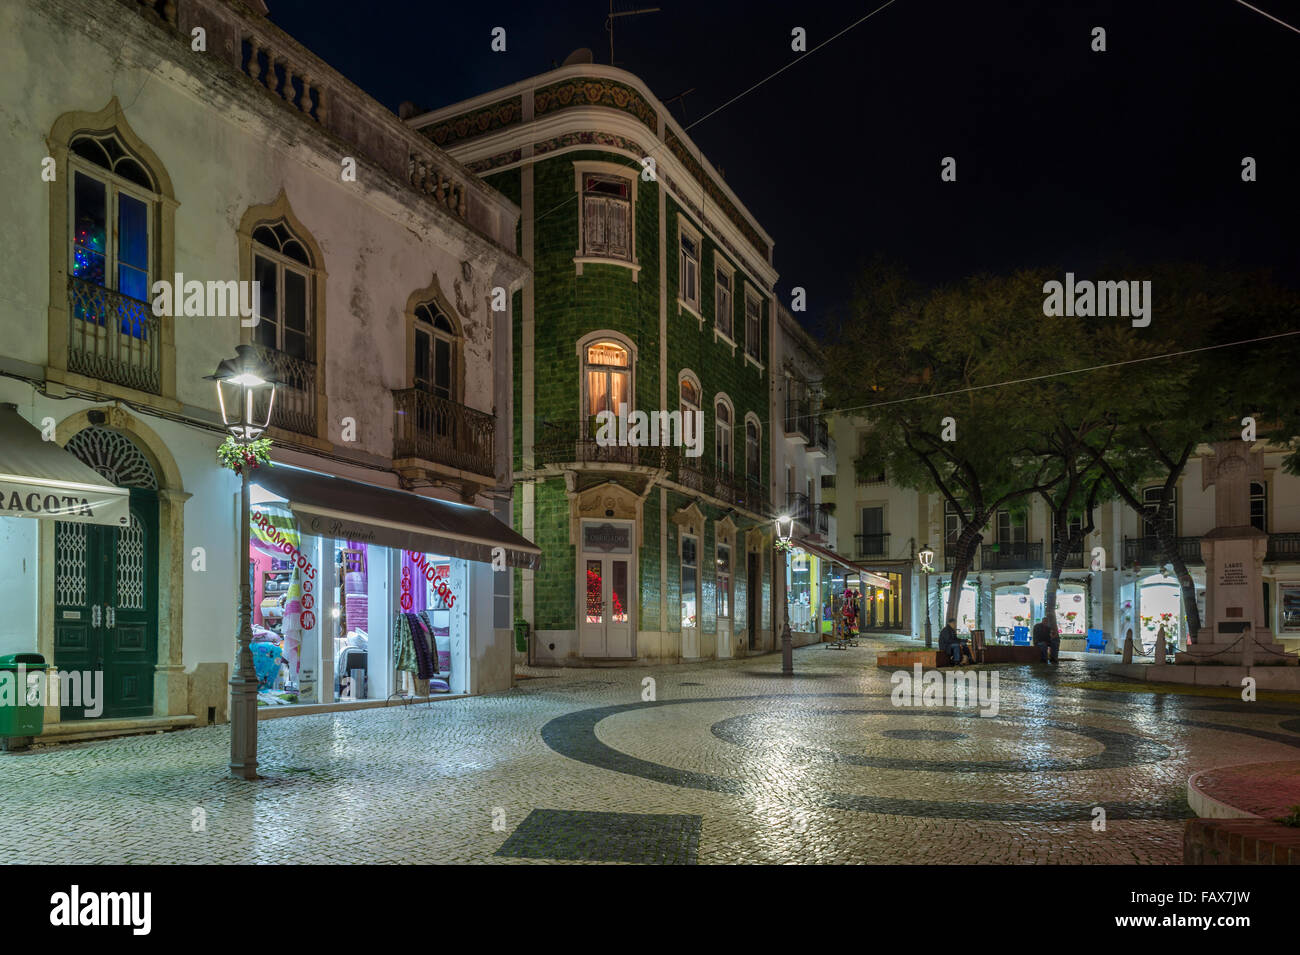 Traditional green tiled house in the town square, Praca de Camoes,  Lagos, Portugal, at night. Stock Photo